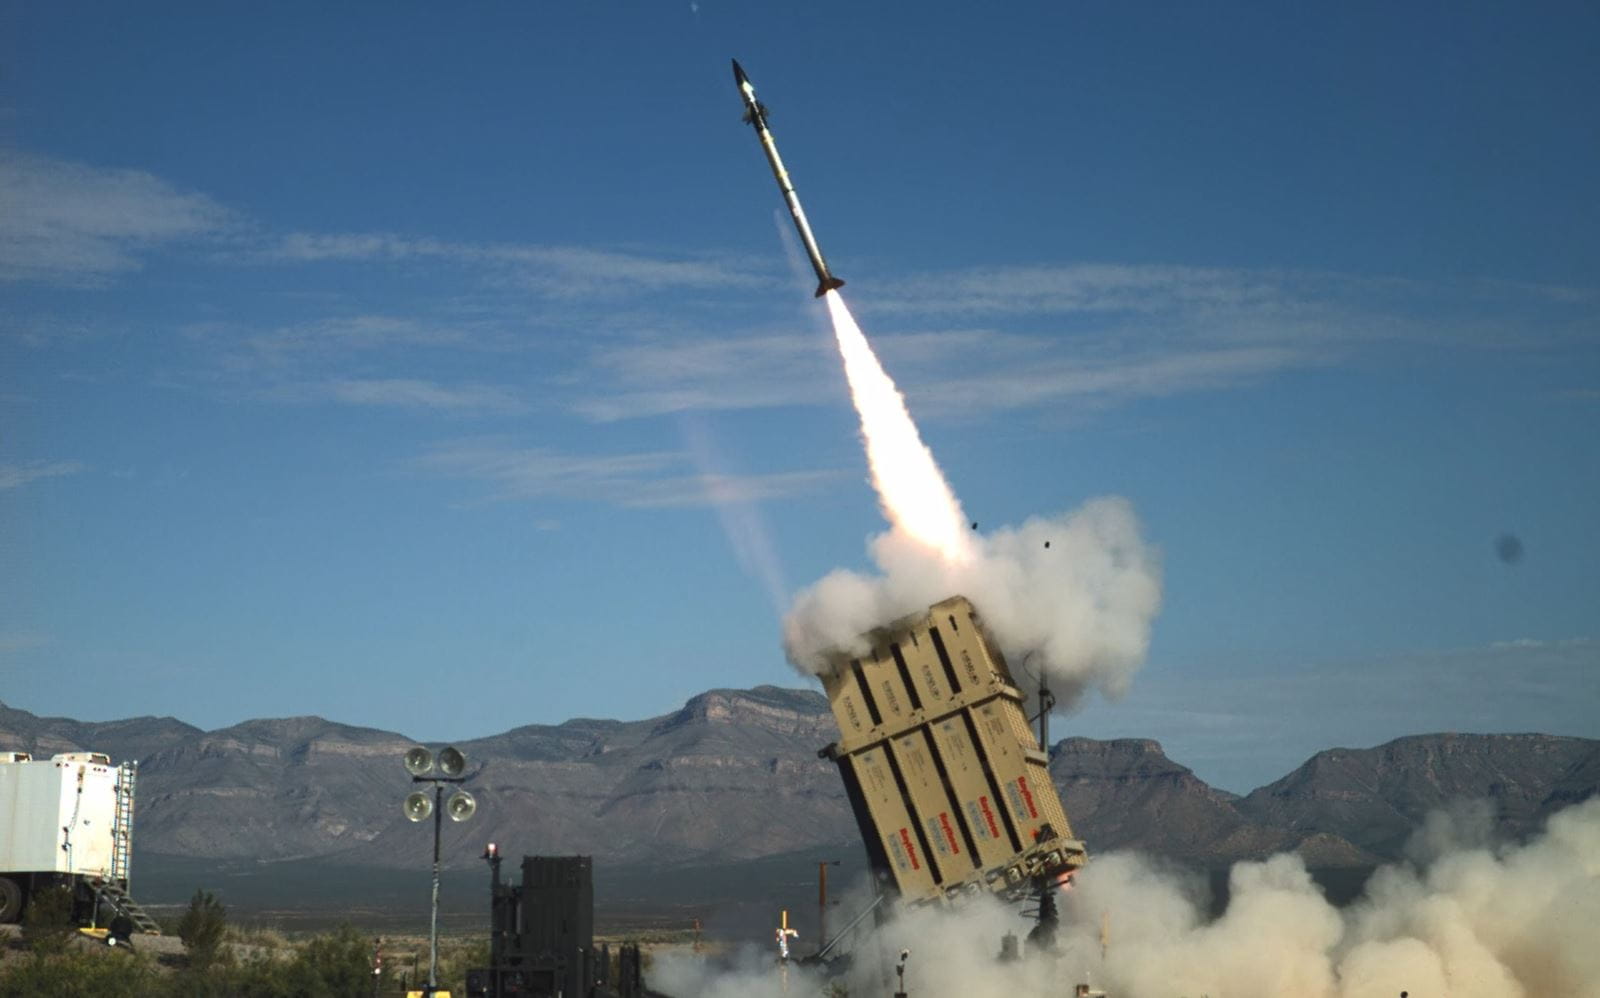 Iron Dome’s Tamir missile